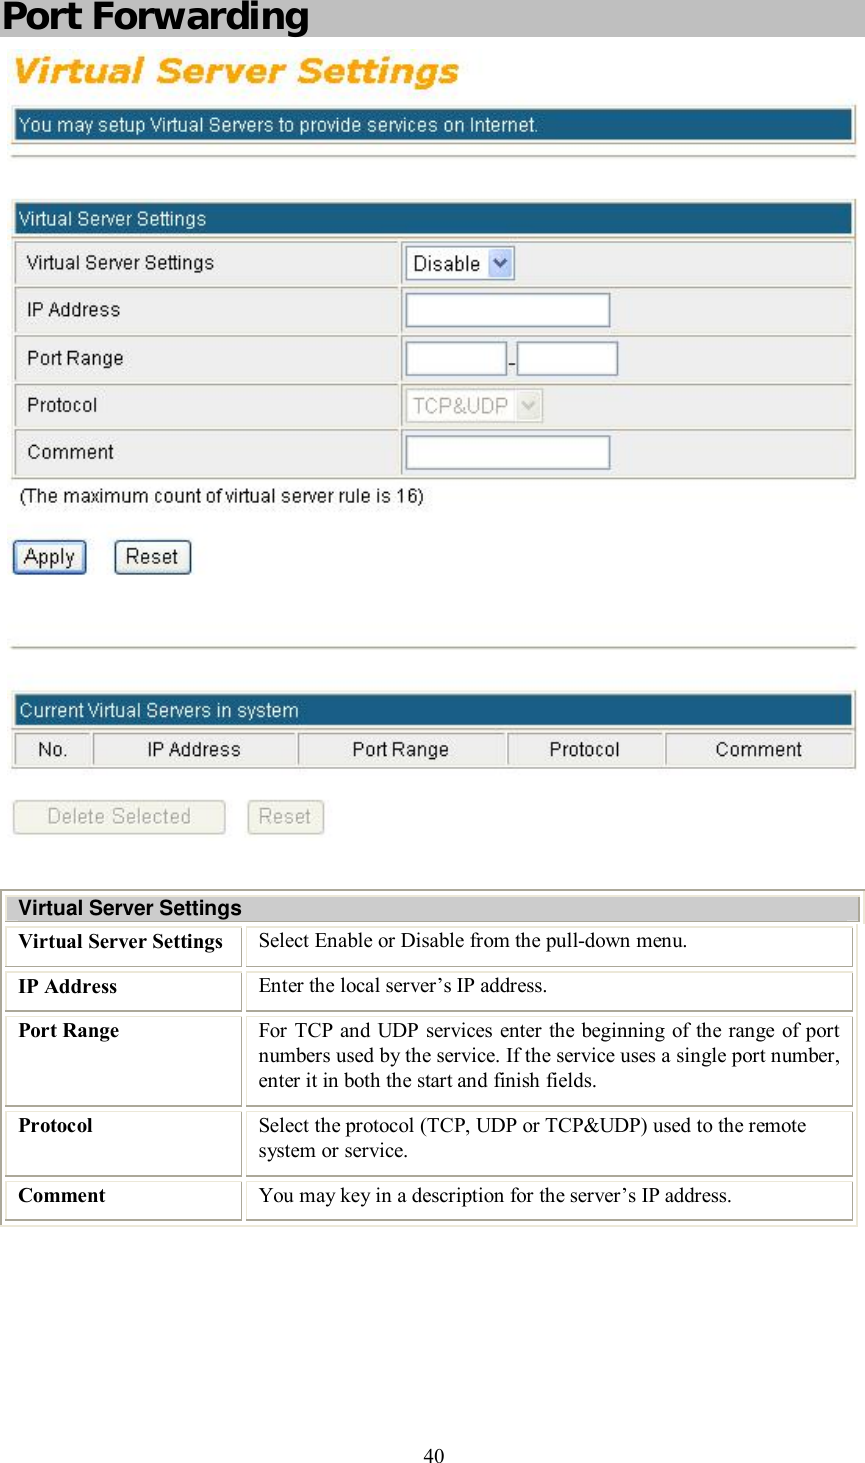    40  Port Forwarding   Virtual Server Settings Virtual Server Settings  Select Enable or Disable from the pull-down menu. IP Address  Enter the local server’s IP address. Port Range  For TCP and UDP services enter the beginning of the range of port numbers used by the service. If the service uses a single port number, enter it in both the start and finish fields. Protocol  Select the protocol (TCP, UDP or TCP&amp;UDP) used to the remote system or service. Comment  You may key in a description for the server’s IP address.  